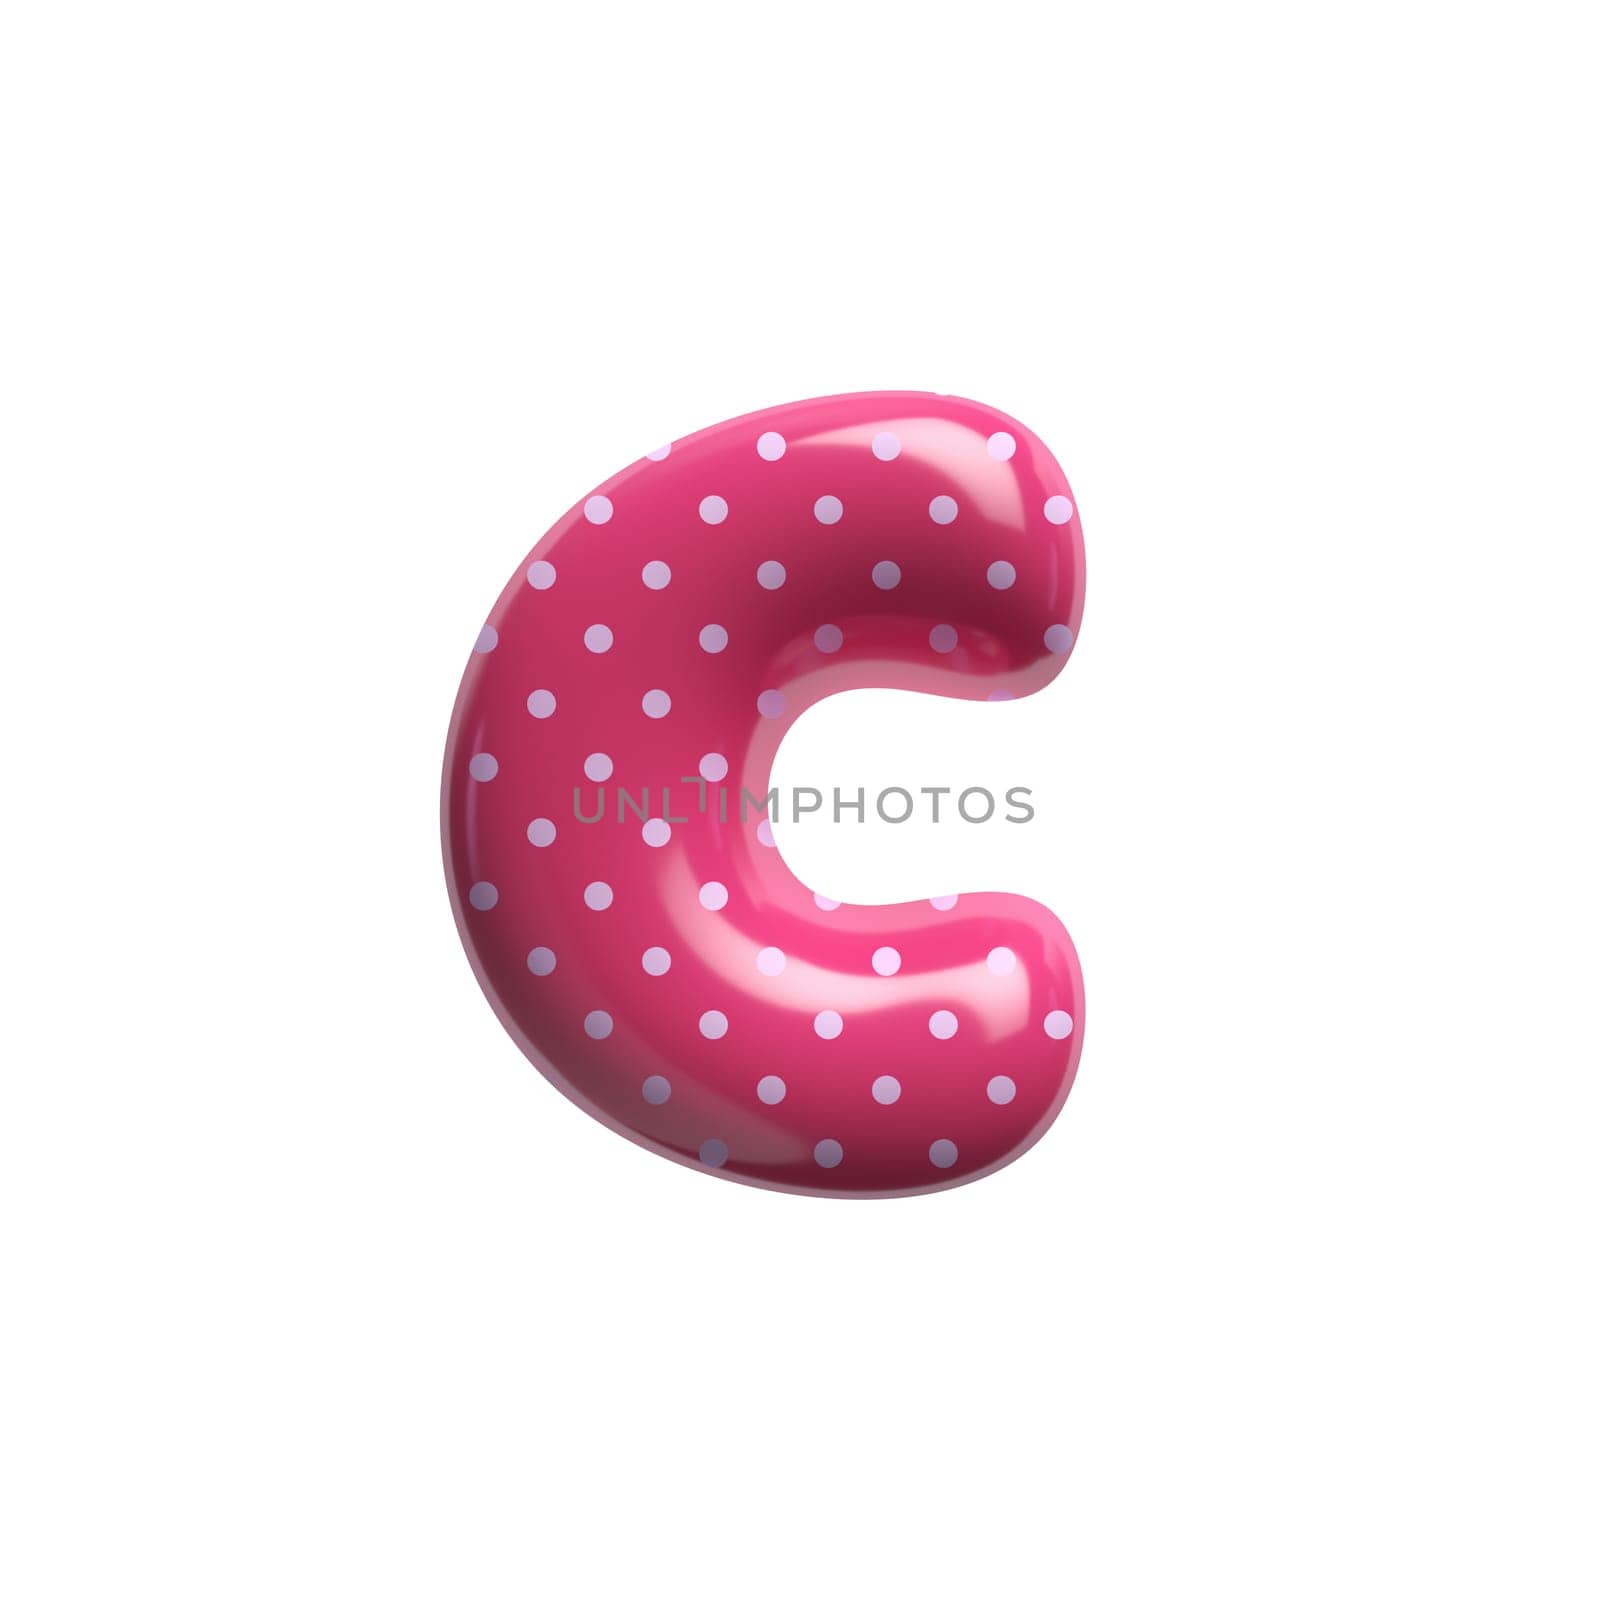 Polka dot letter C - Lowercase 3d pink retro font - Suitable for Fashion, retro design or decoration related subjects by chrisroll